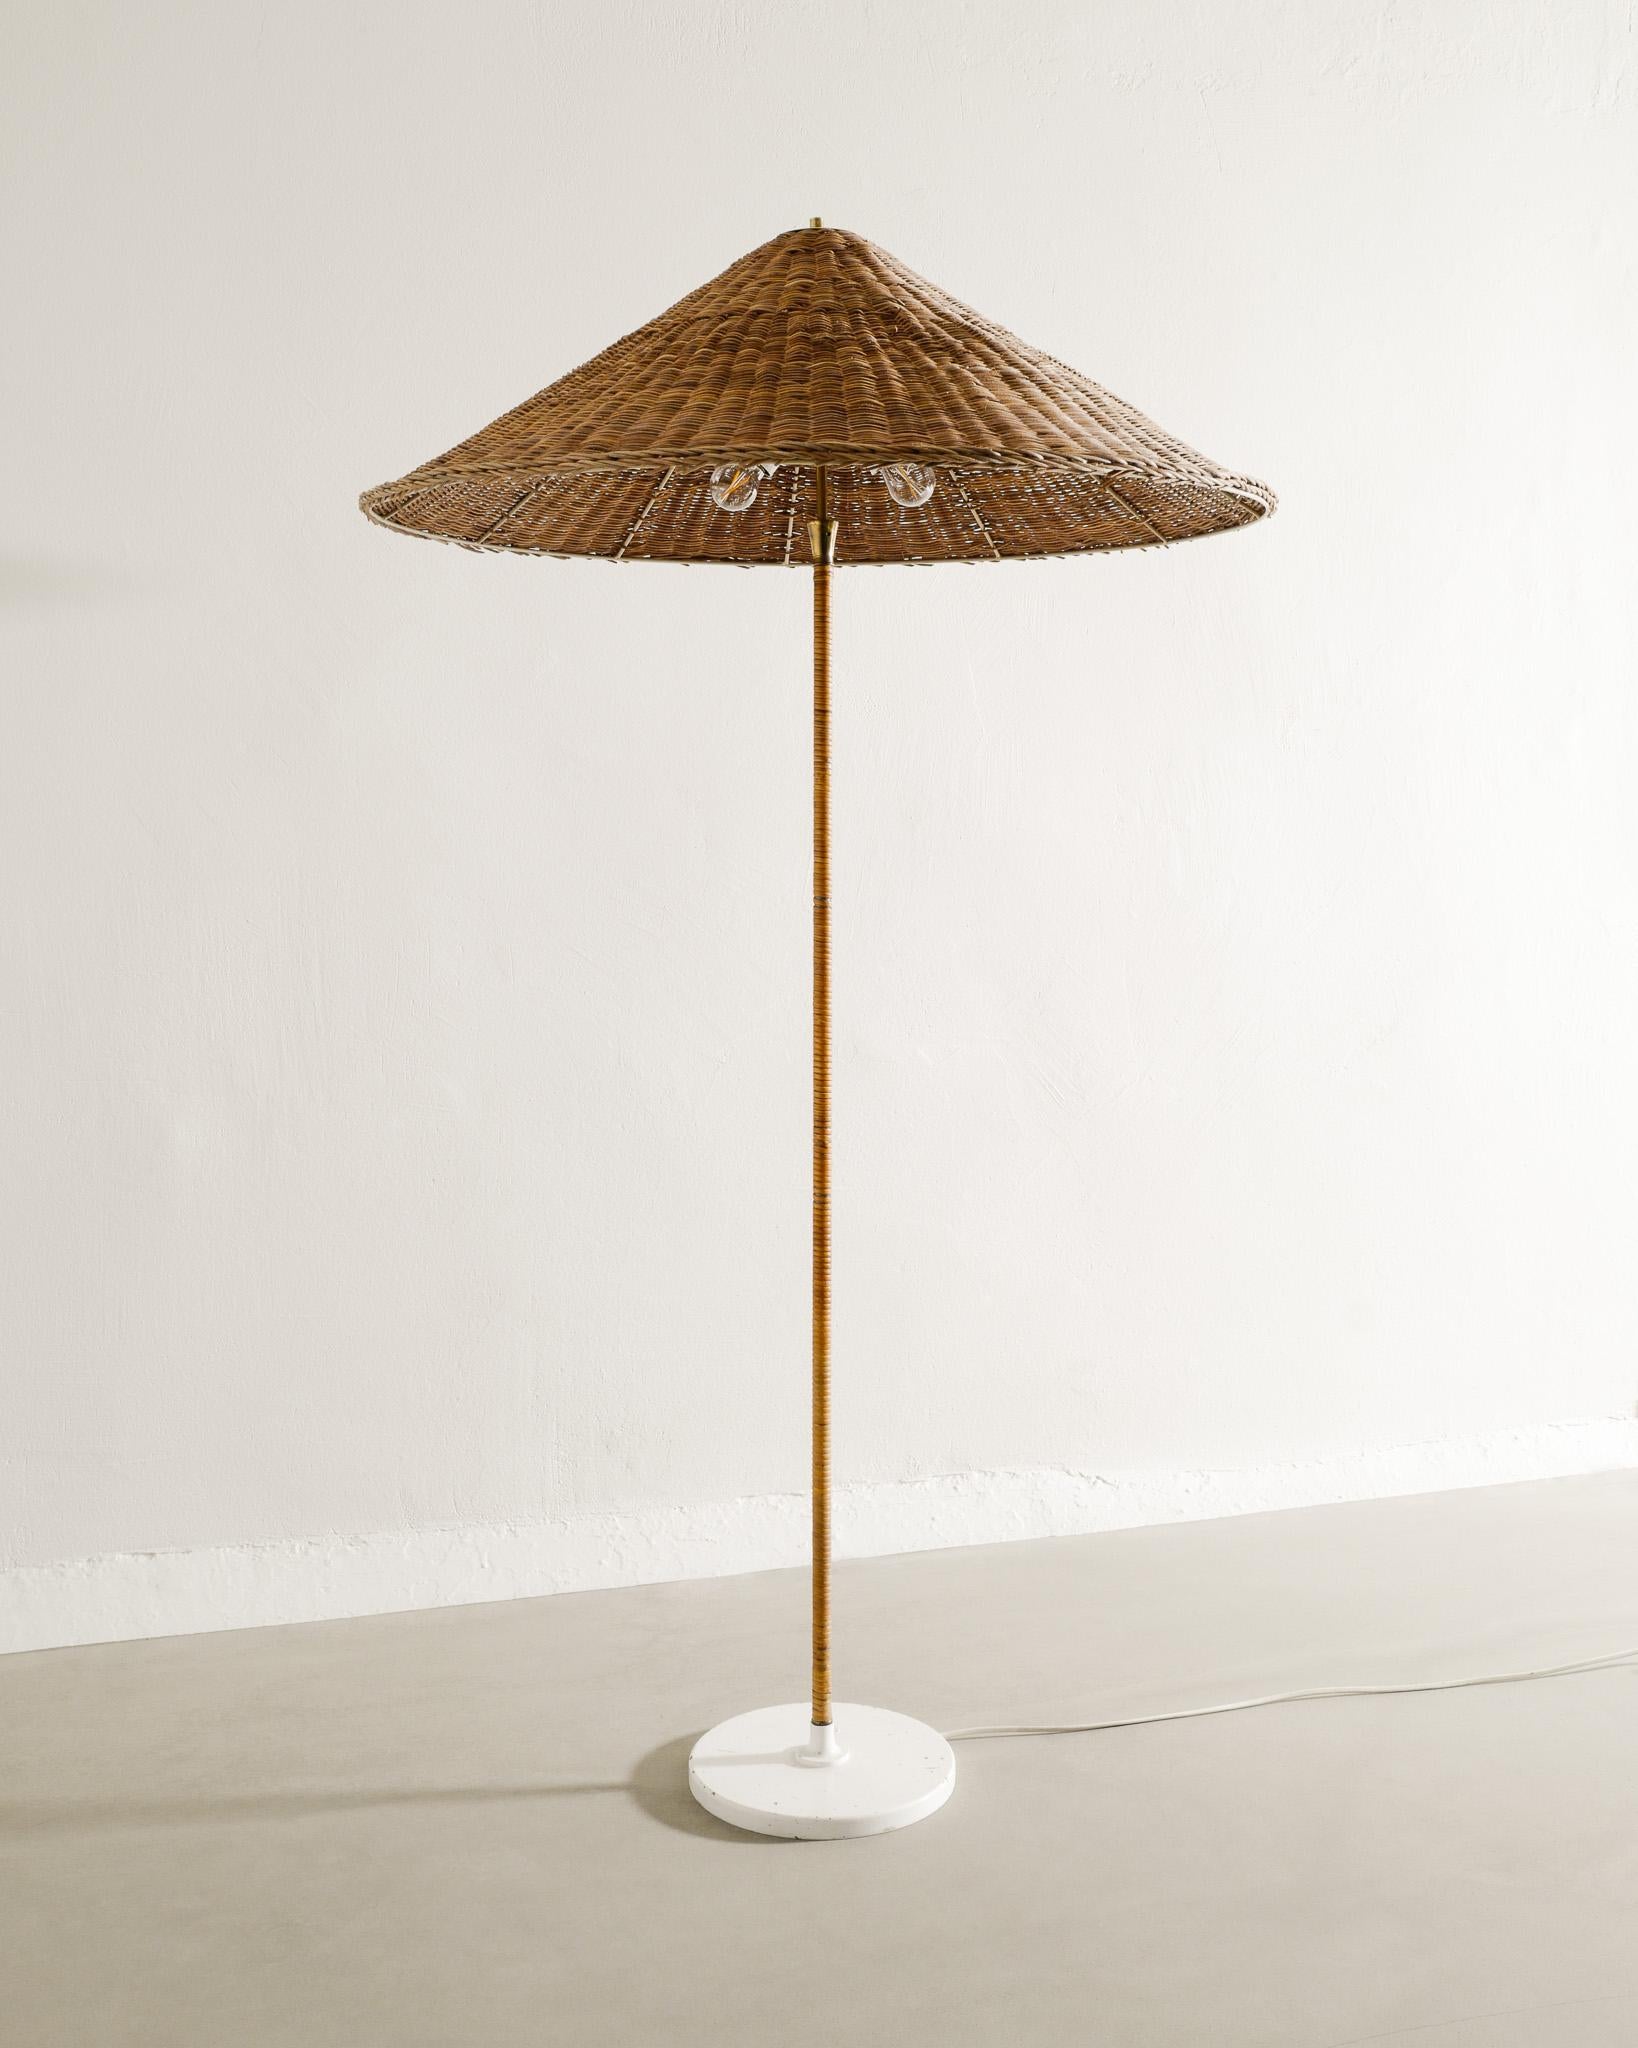 Scandinavian Modern Finnish Mid Century Floor Lamp by Itsu in the style of Paavo Tynell 9202, 1940s  For Sale